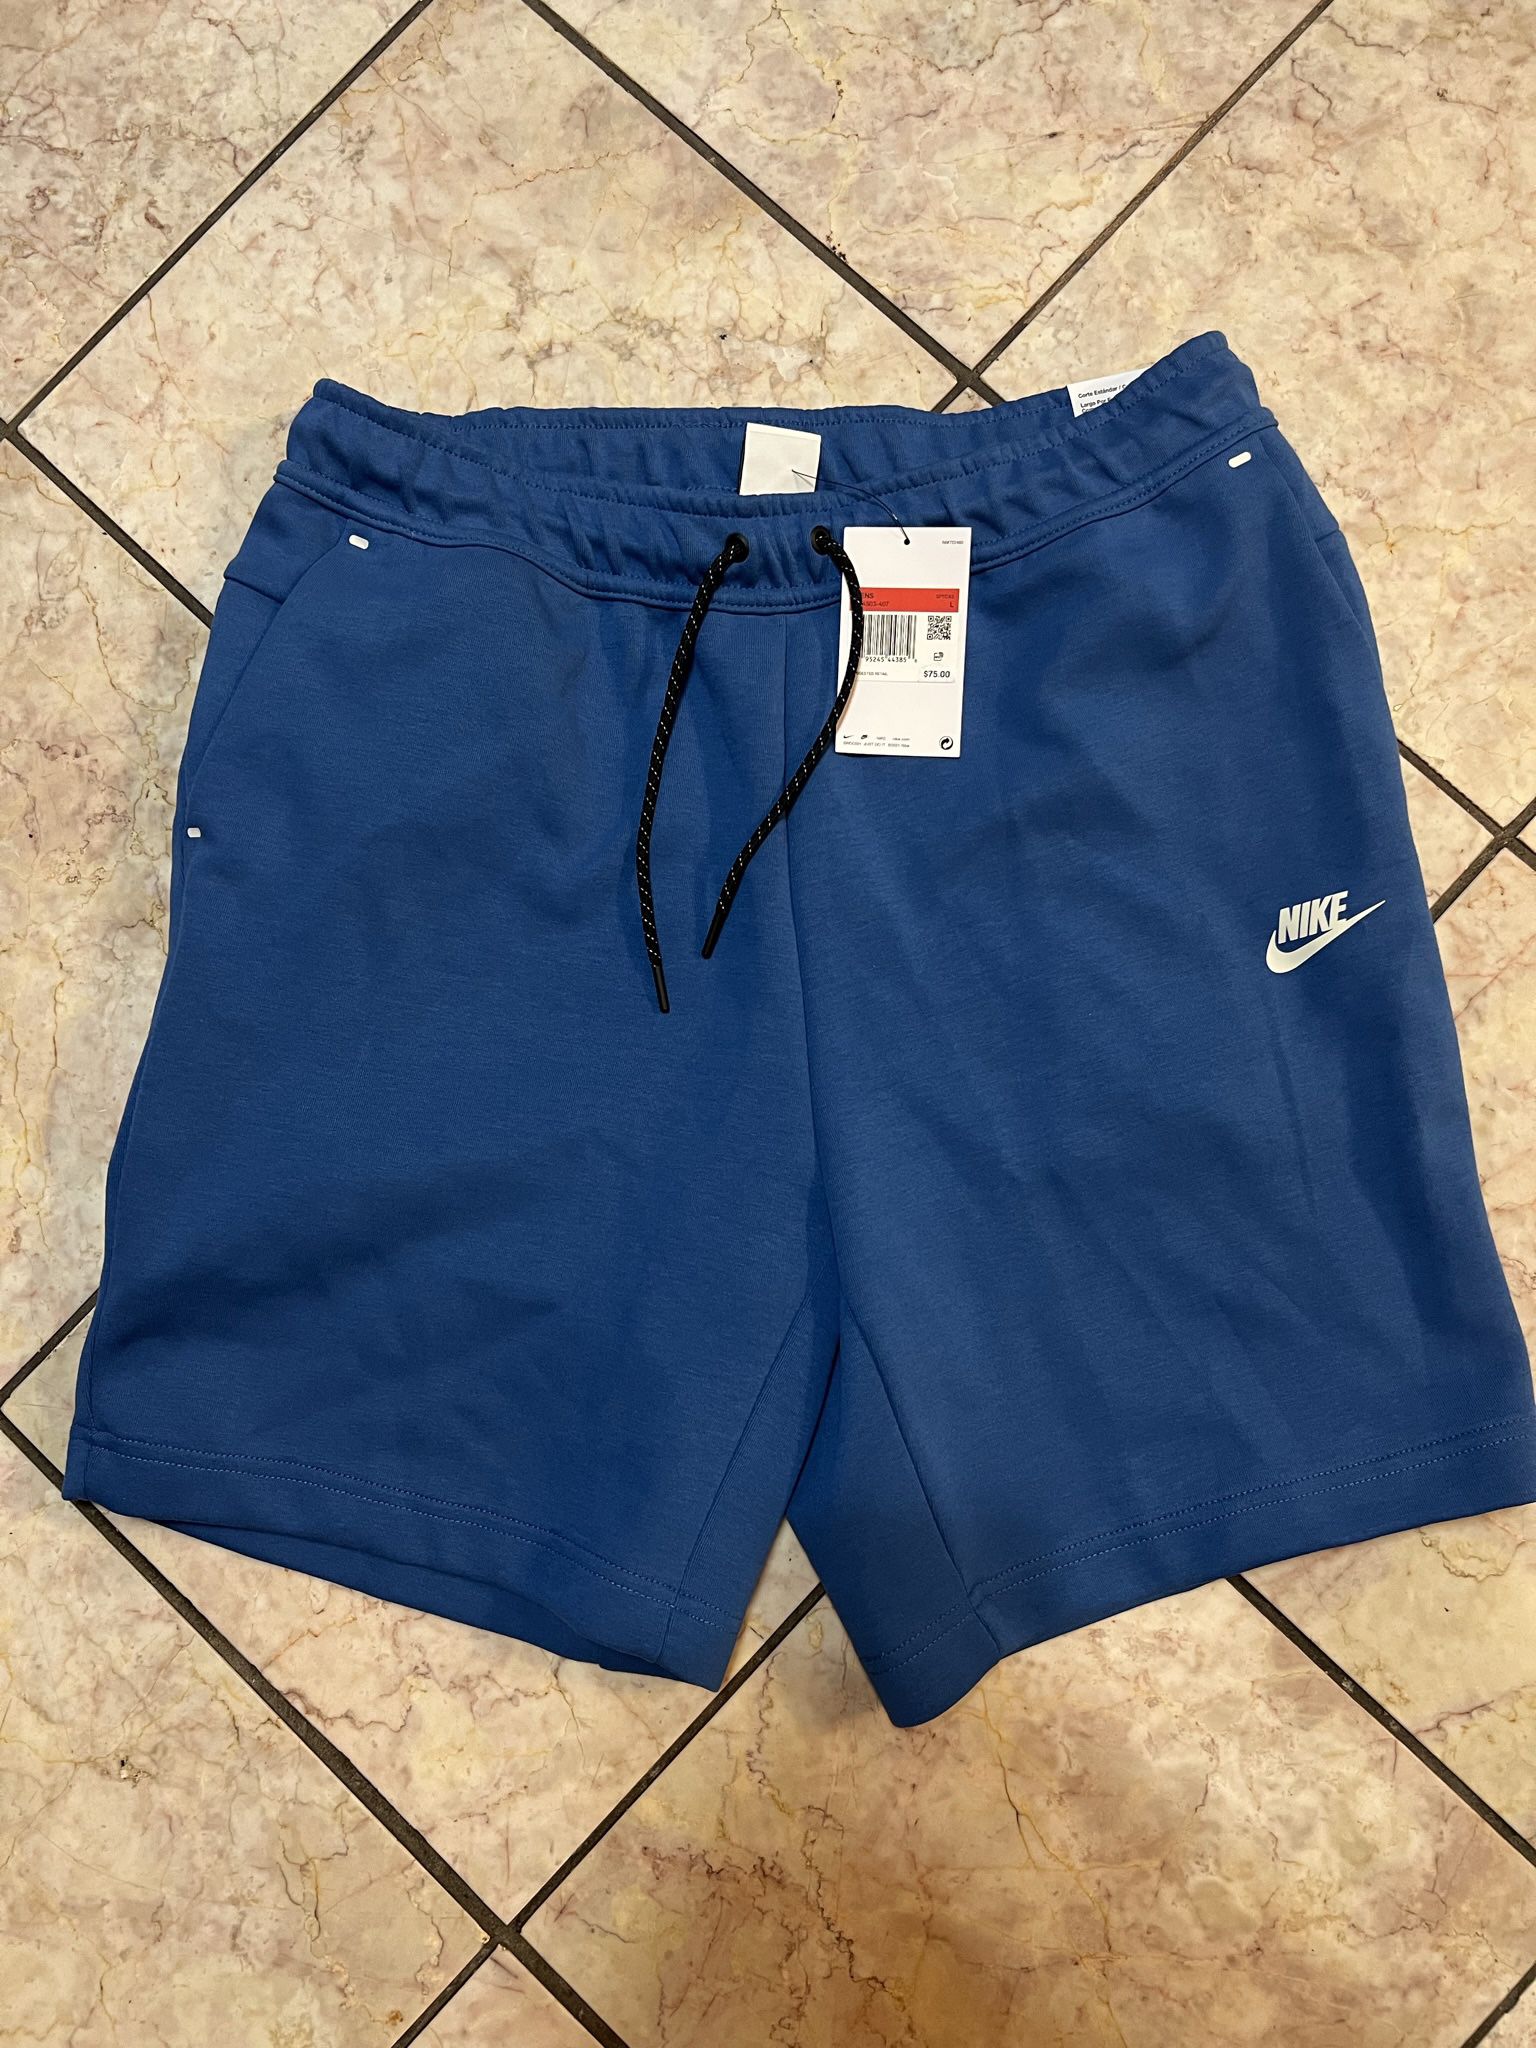 Brand new with tags Men’s Nike tech fleece shorts size large 